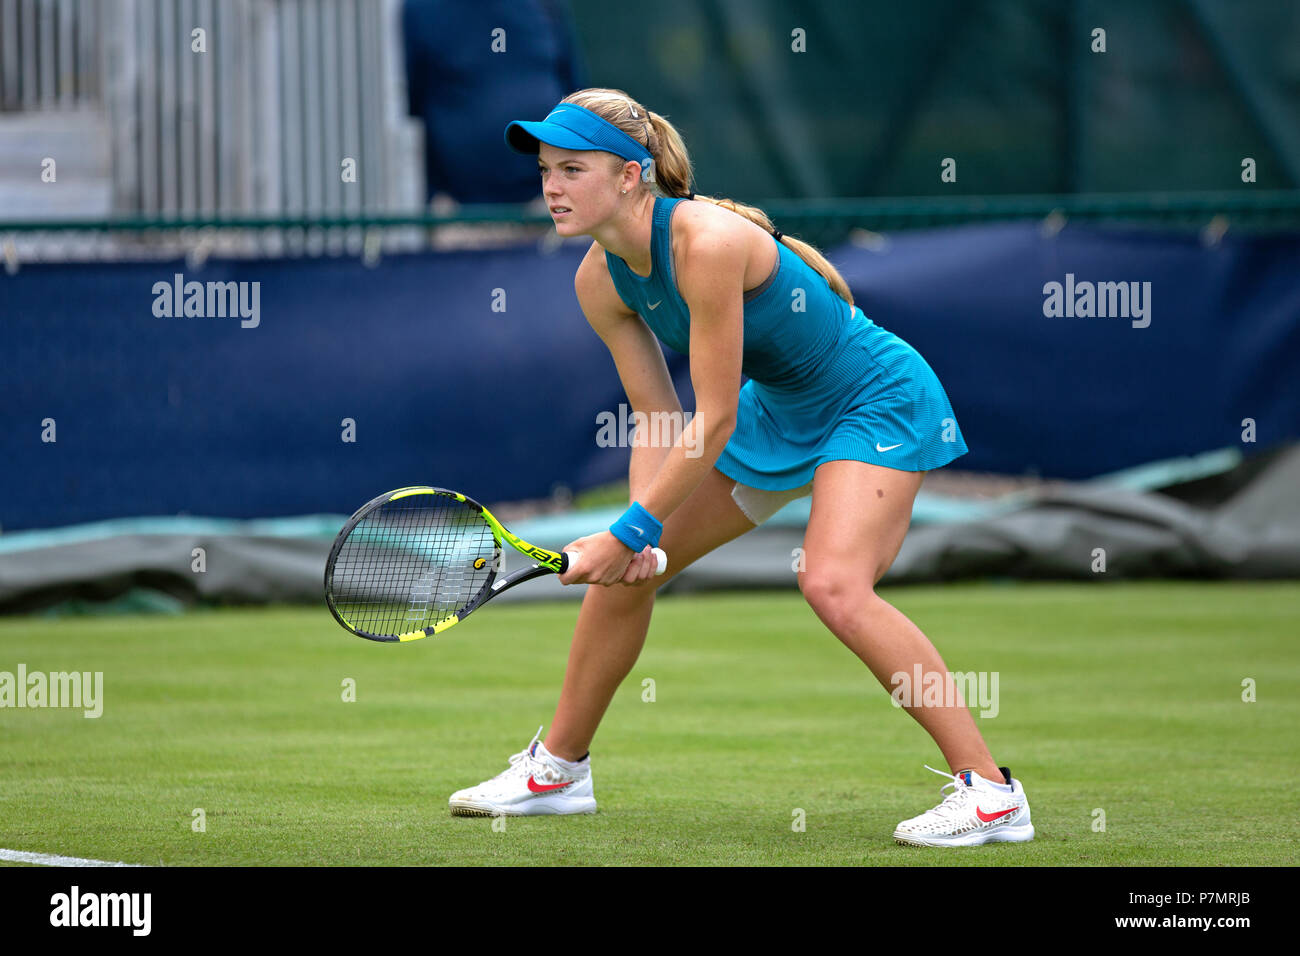 A professional tennis player (Katie Swan) positioned in the ready position during a match. Swan is awaiting a serve from her opponent. Stock Photo